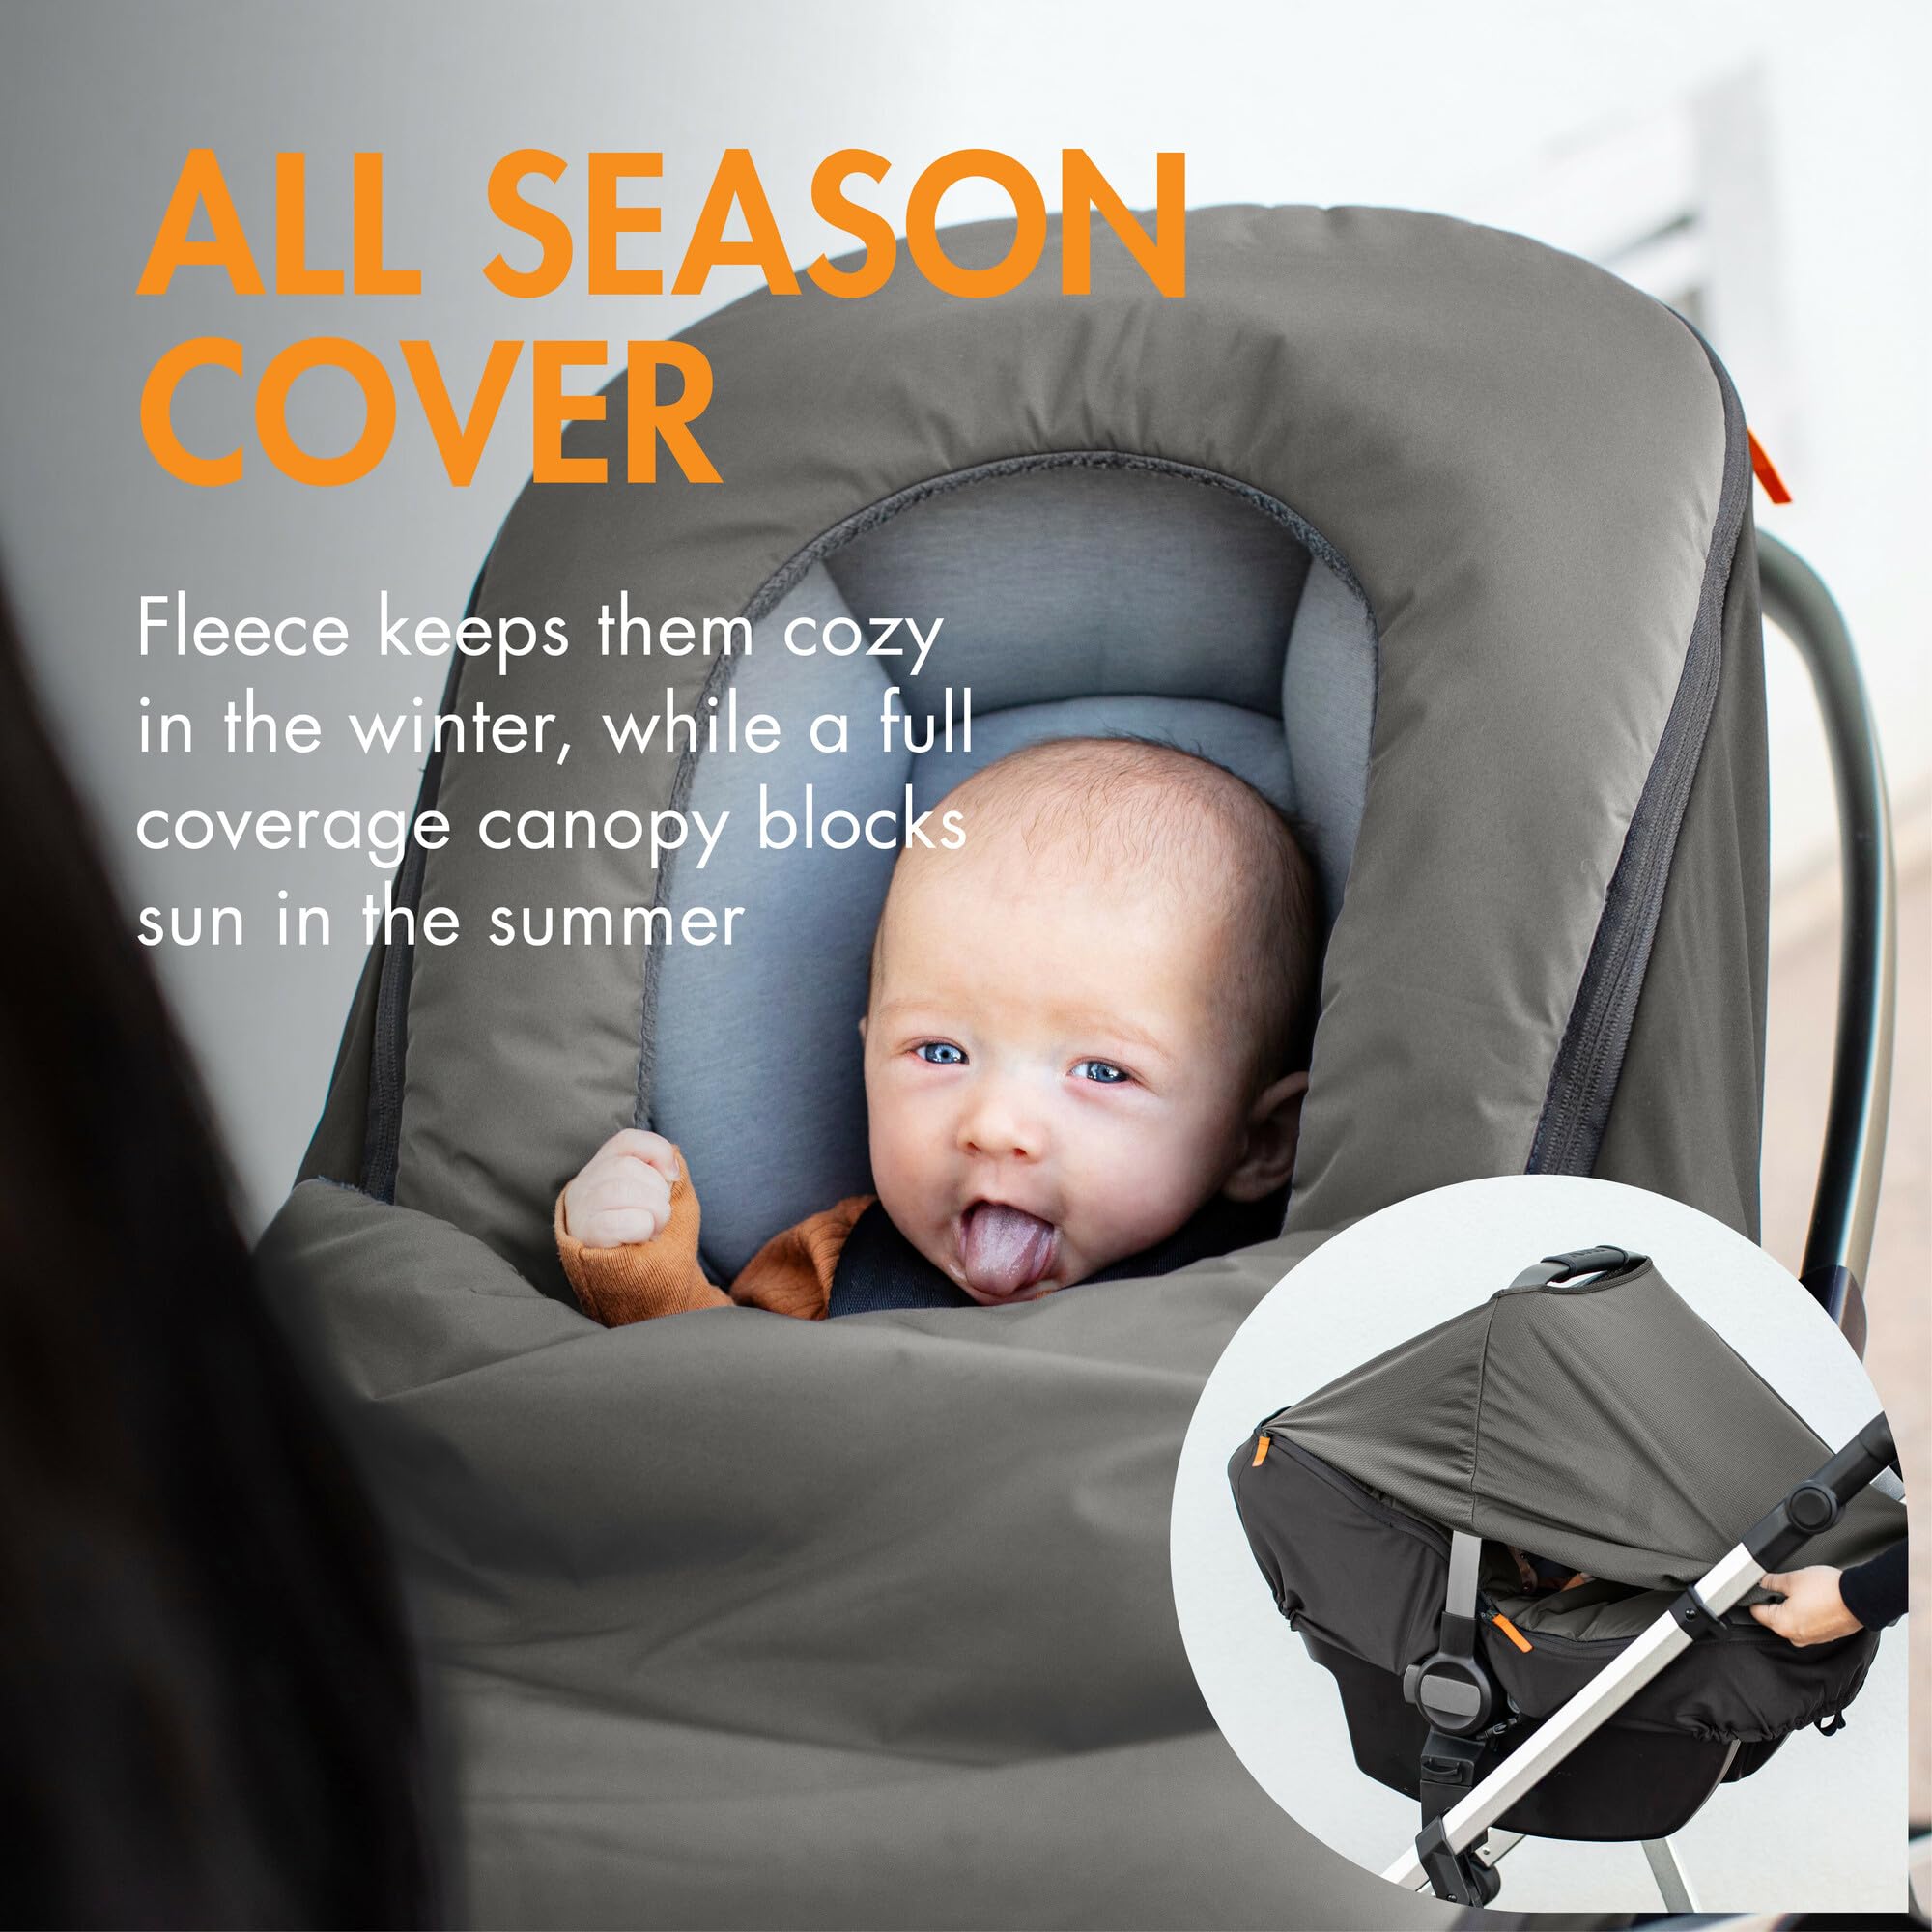 Boon Morph Baby Car Seat Cover and Car Seat Canopy - Water Resistant Car Seat Covers for Babies - Machine Washable - 1 Size Fits Most Baby Car Seats